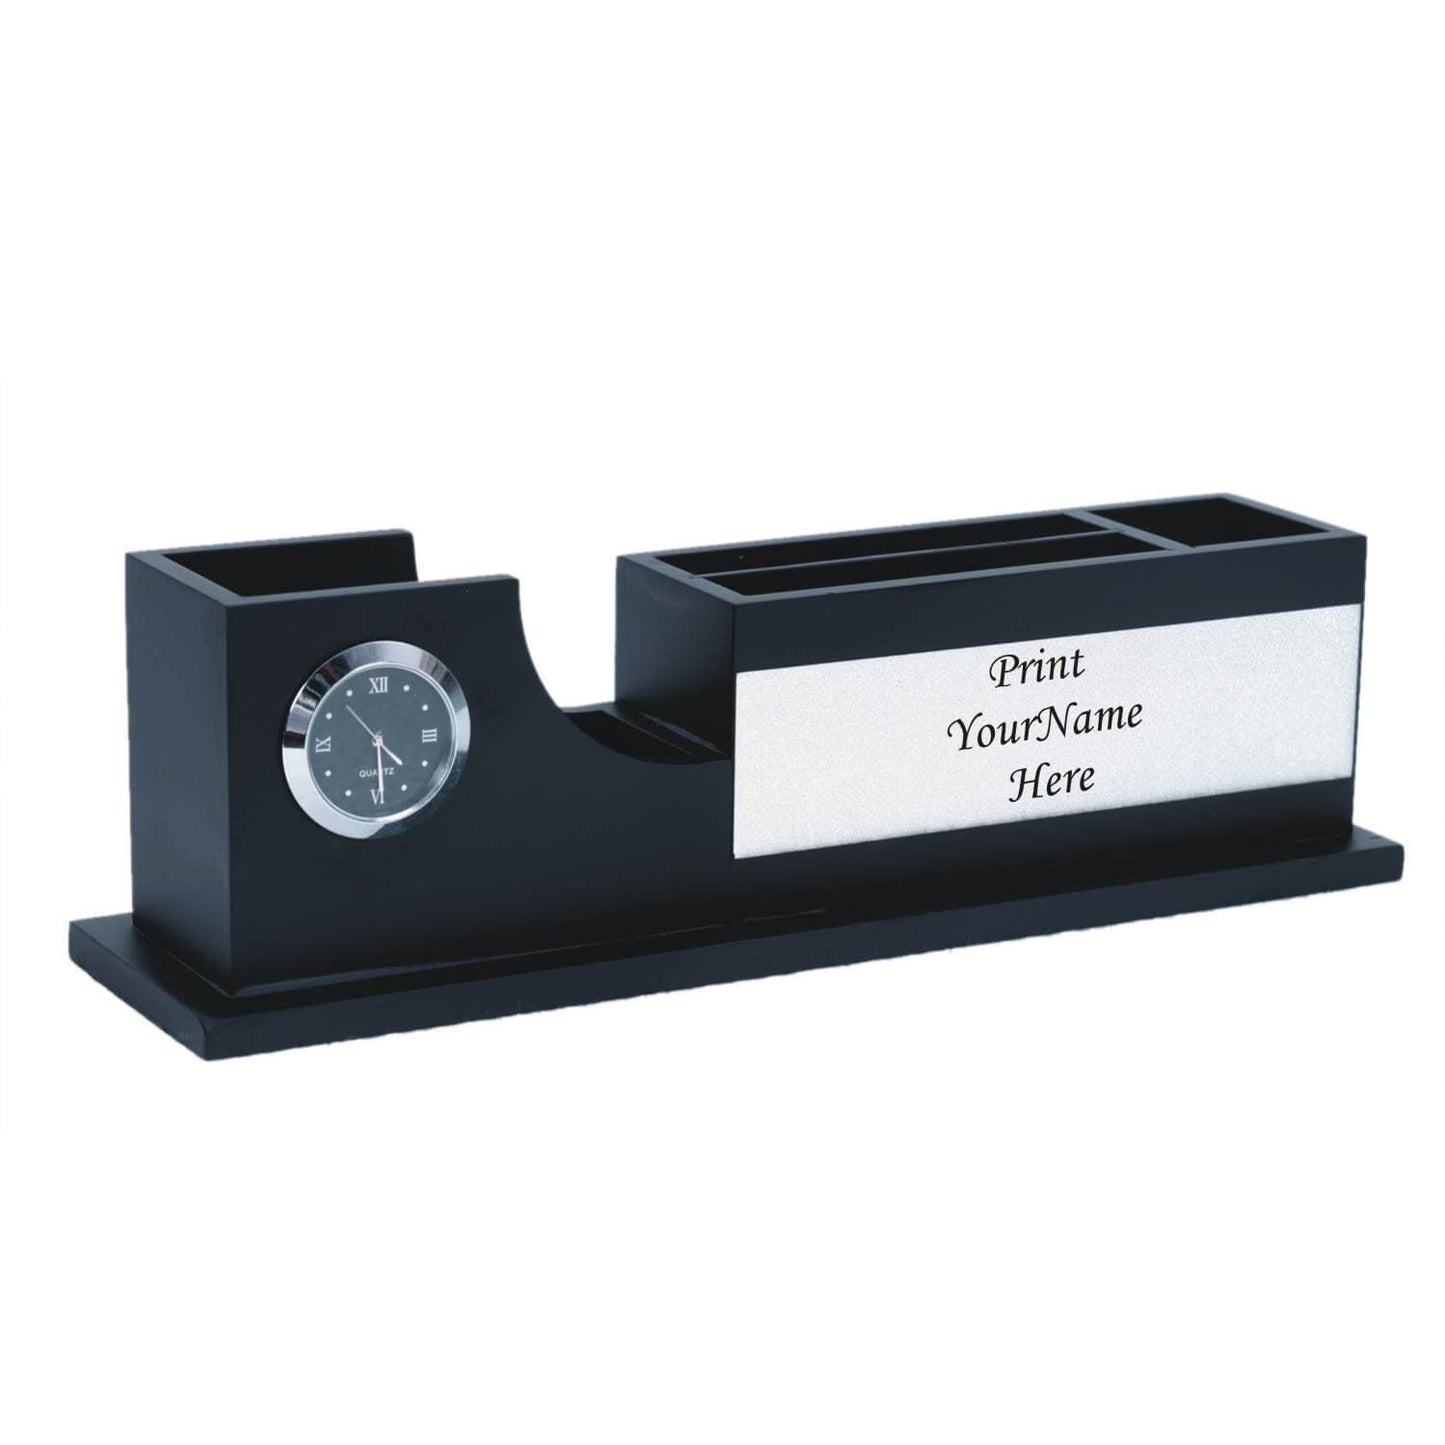 Personalised Gift, Name Printed, Wooden Pen Stand Clock. (Black & Silver)